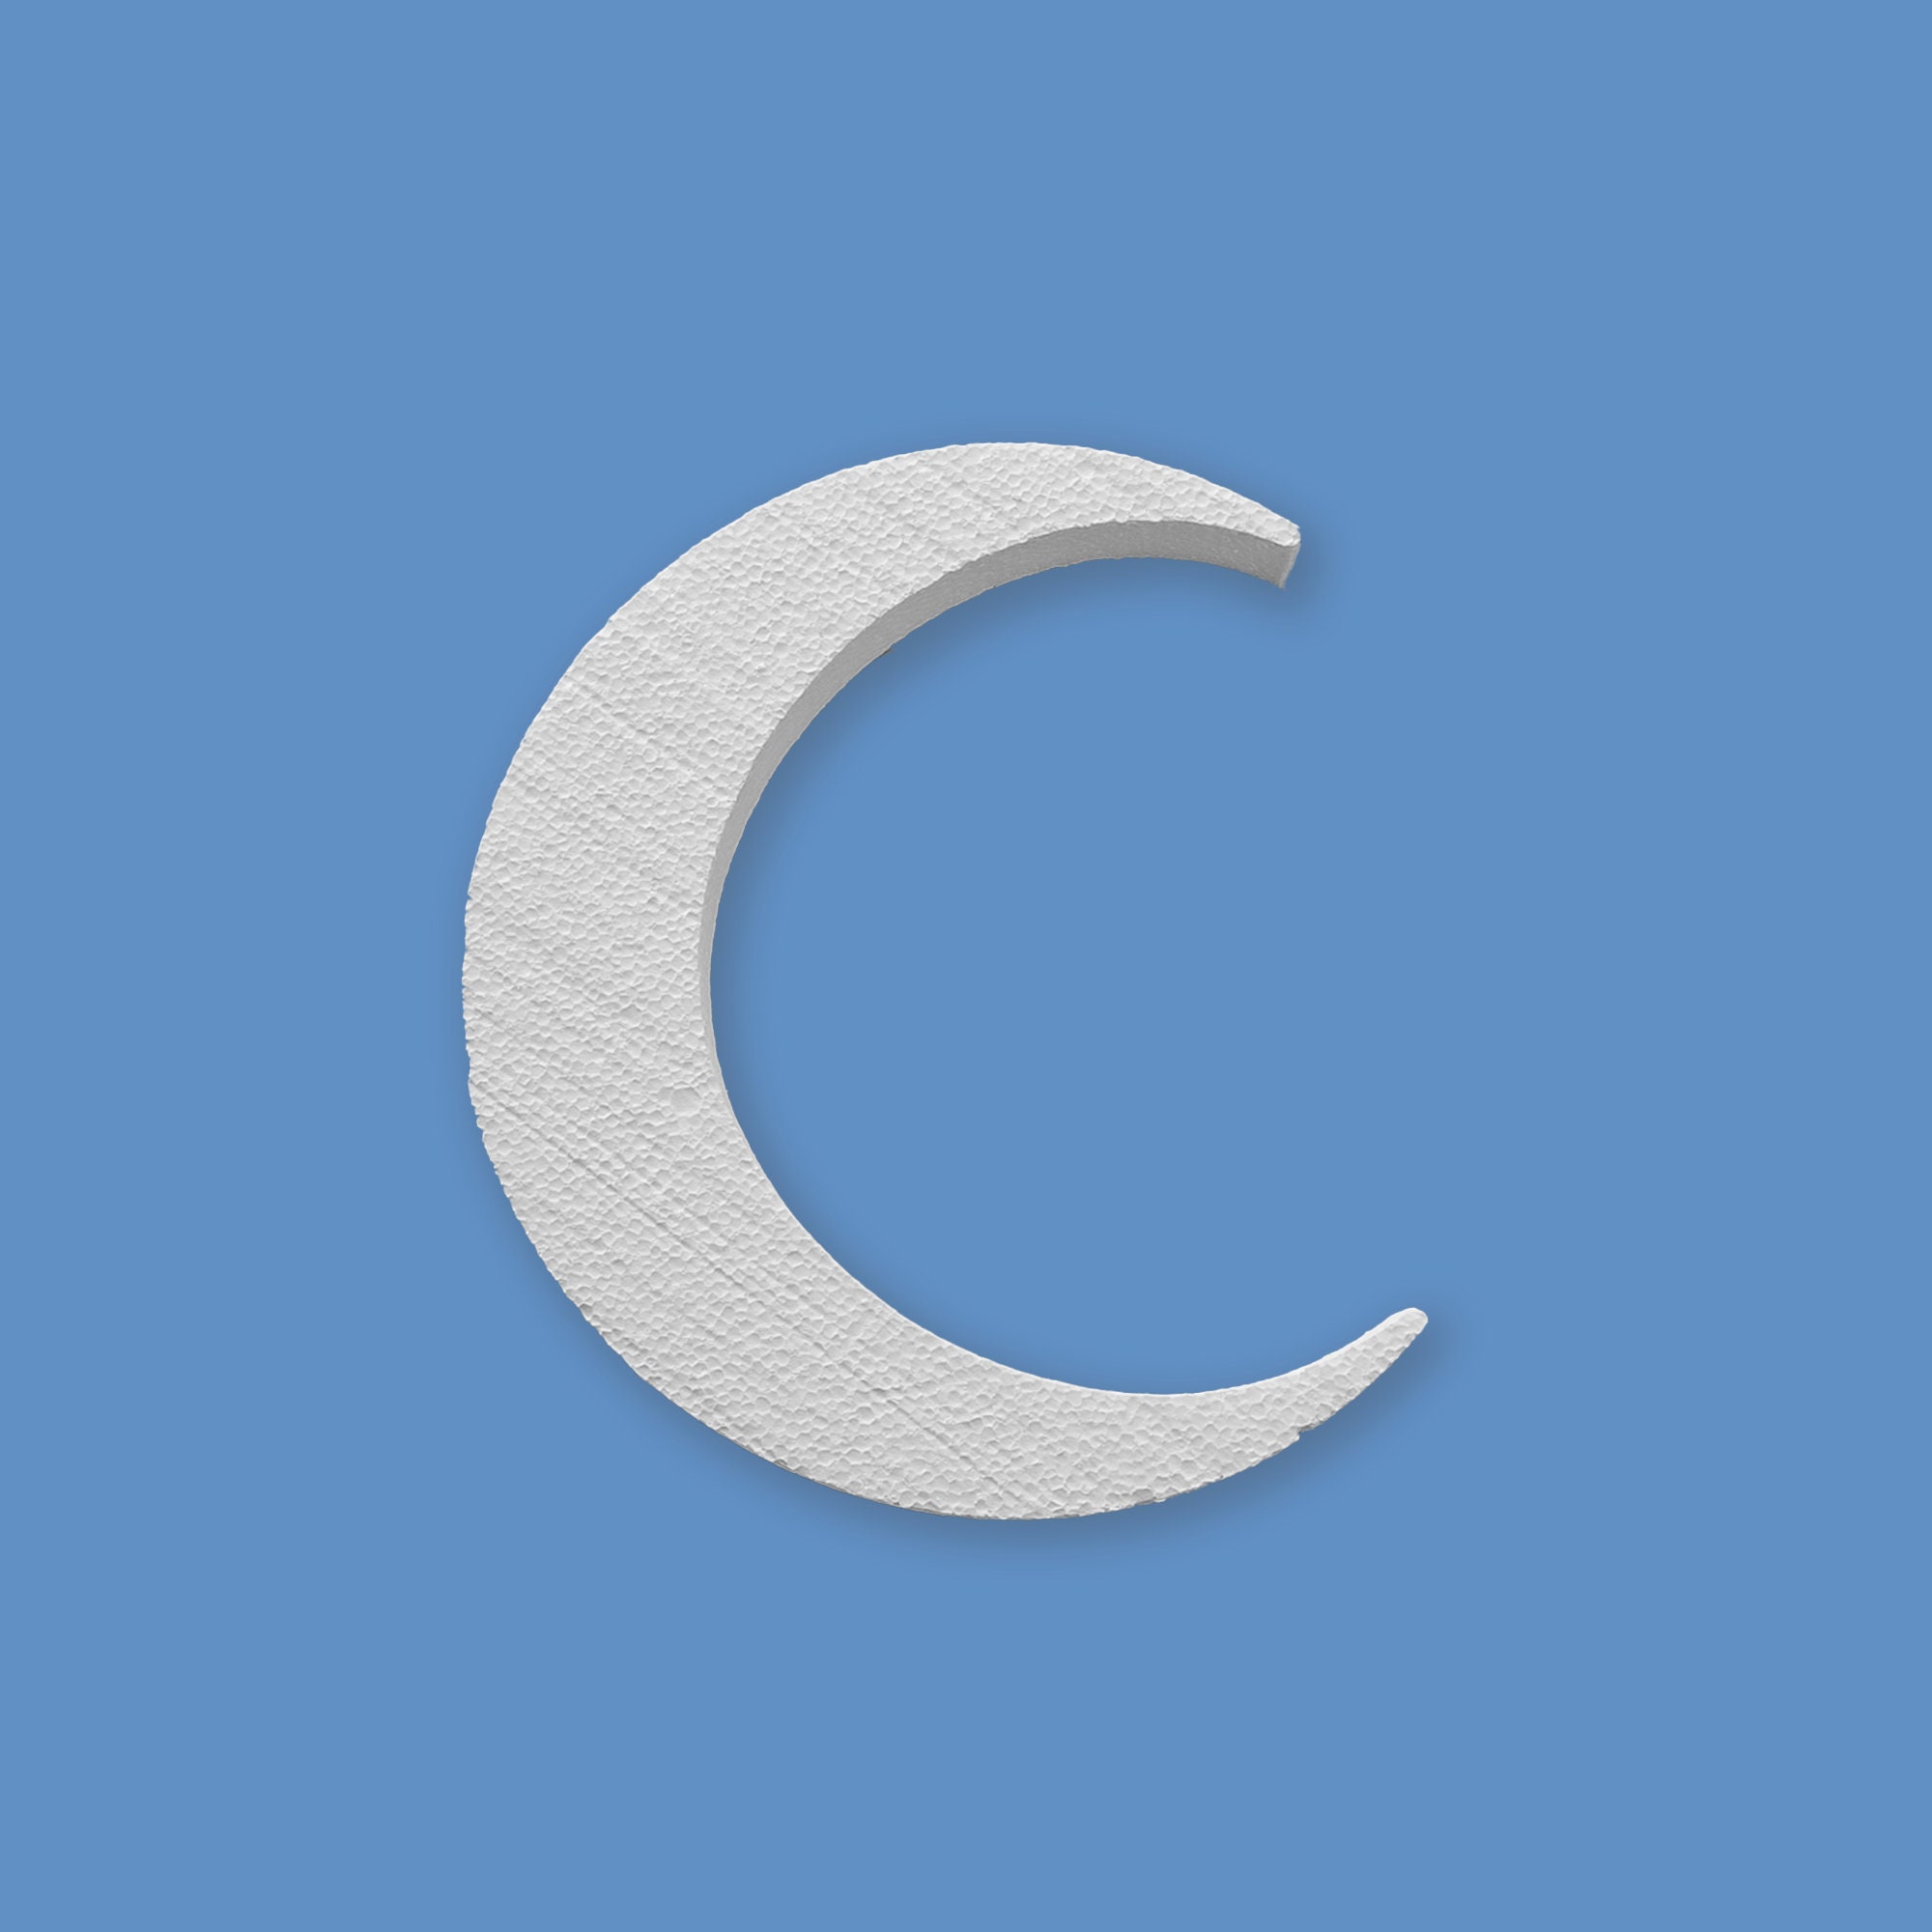 Crescent Moon picture